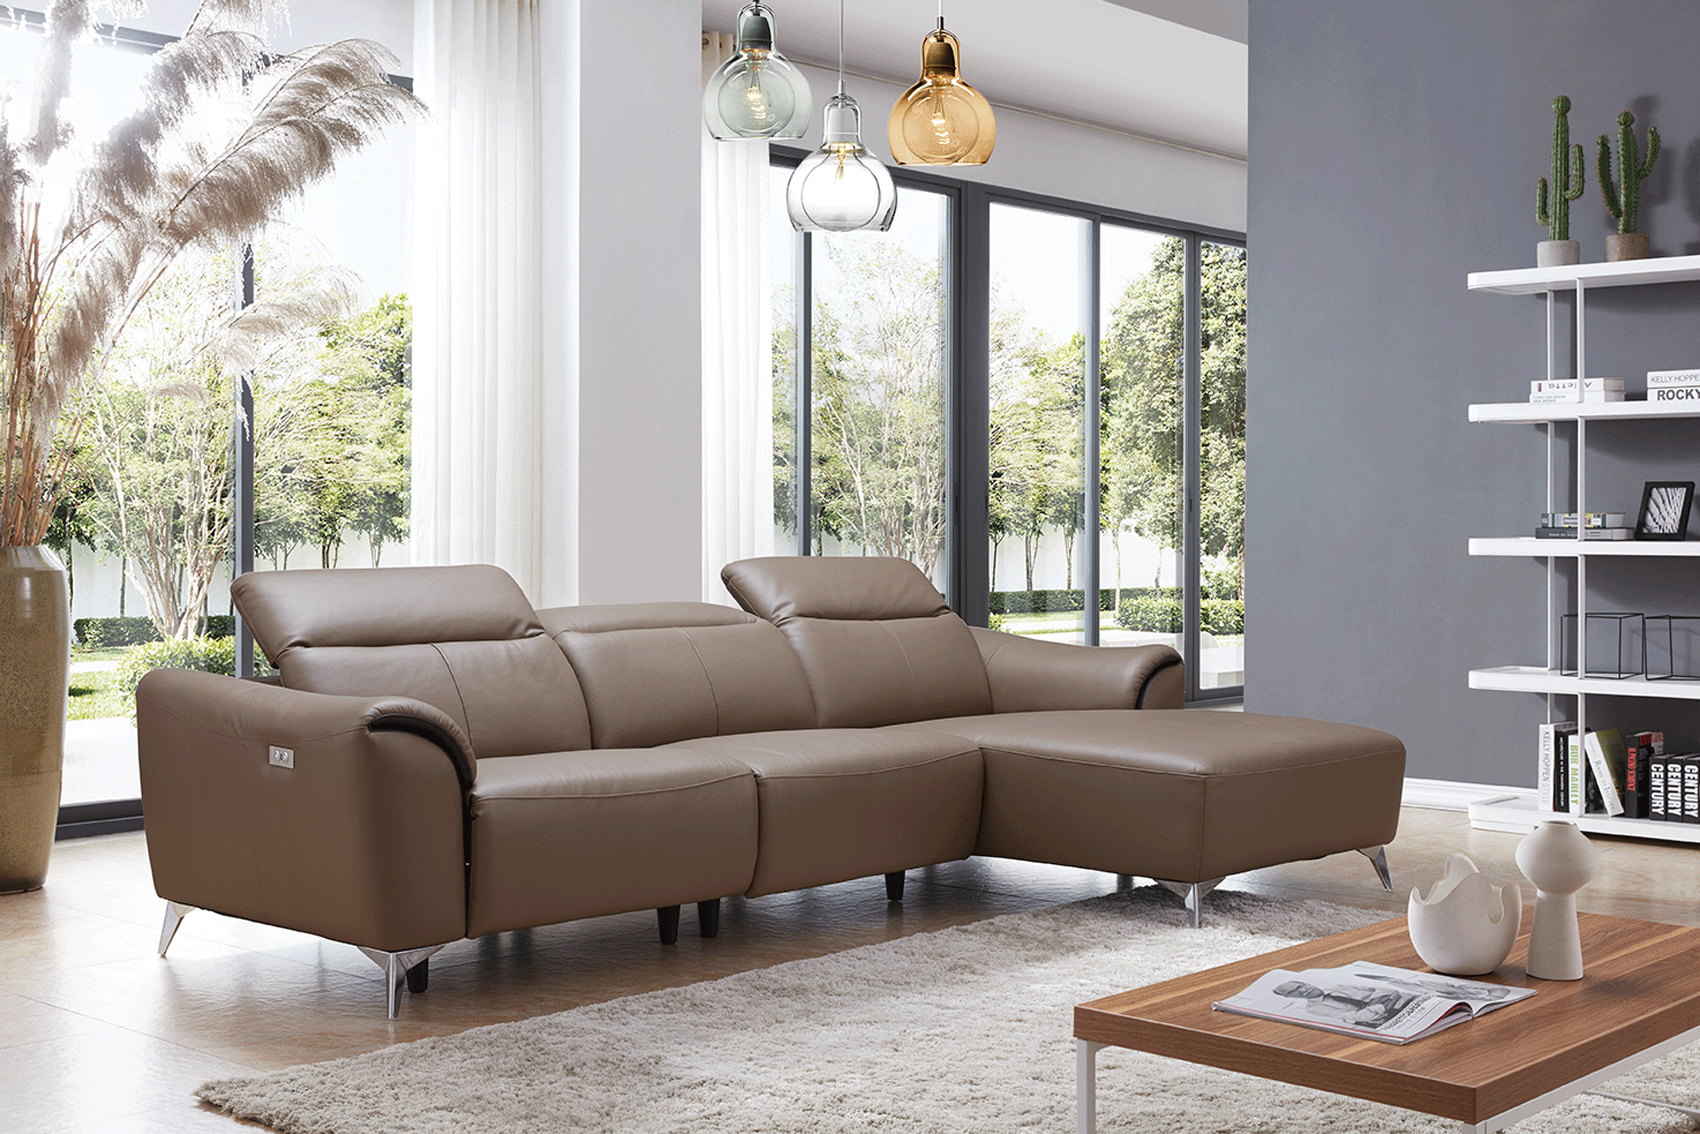 Living Room Furniture Reclining and Sliding Seats Sets 950 Sectional with 1 Electric Recliner